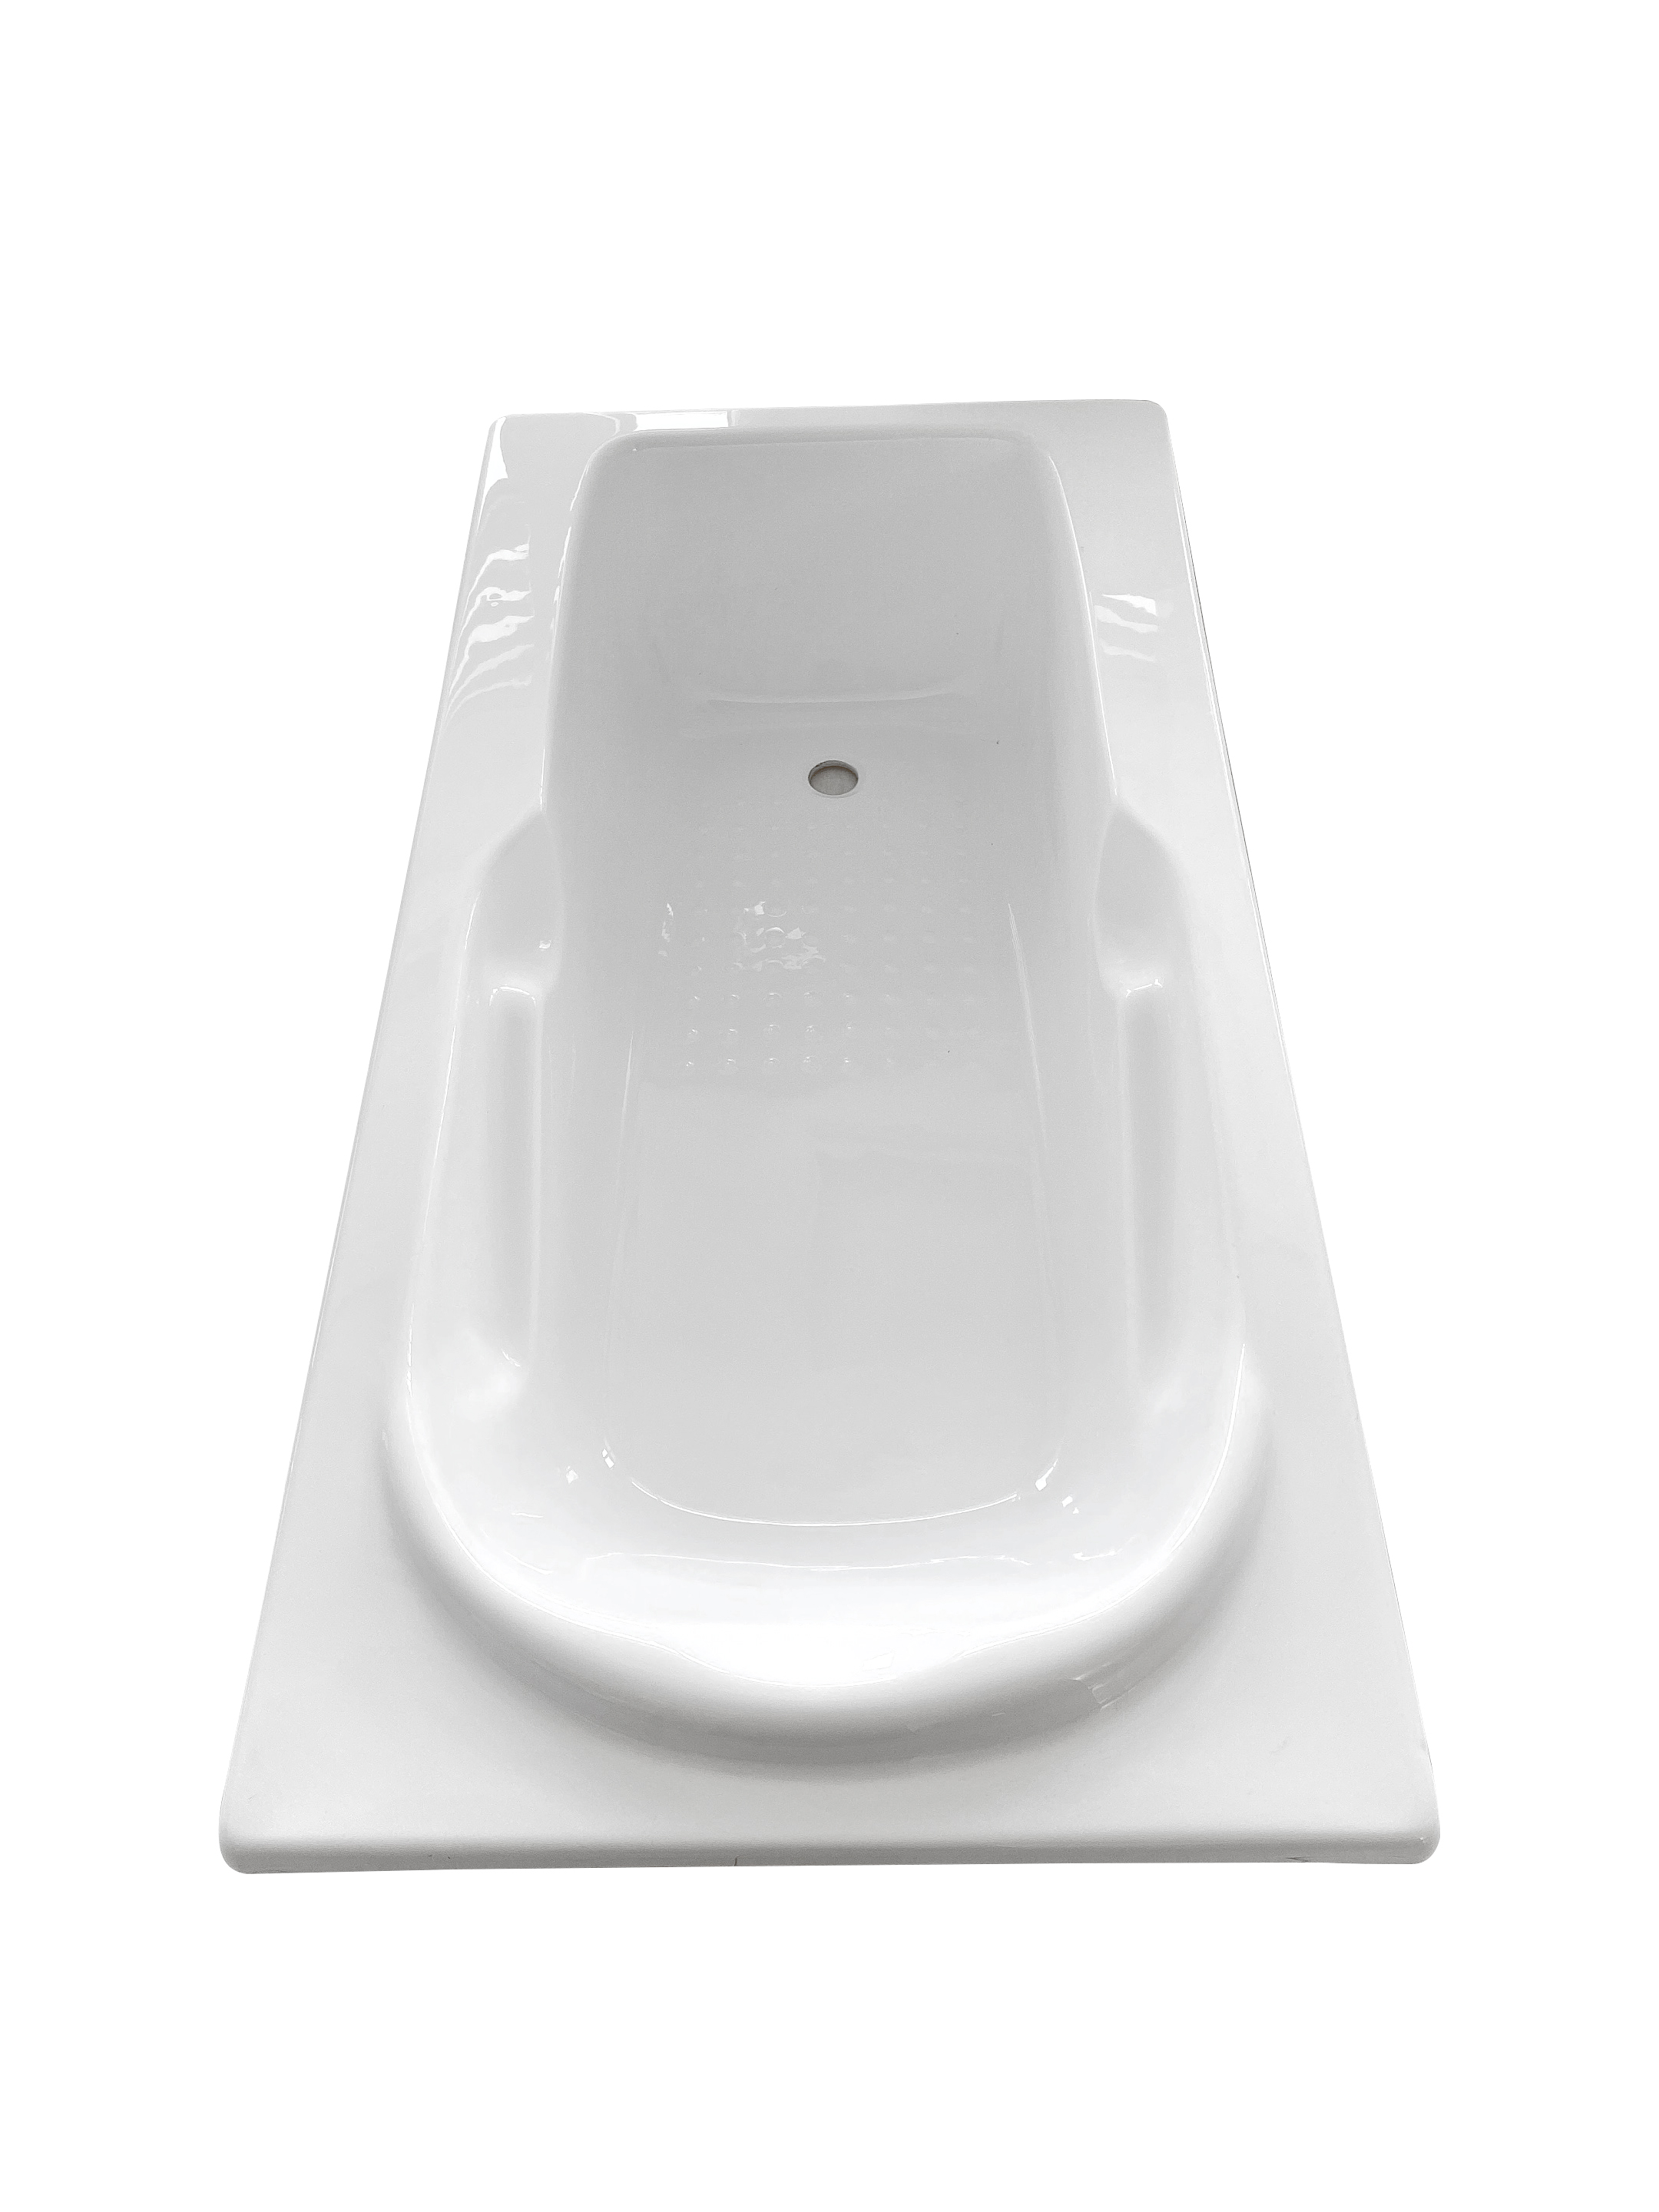 60″ Three Wall Alcove Jetted Whirlpool Bath Tub with Right Side Drain Featured Image